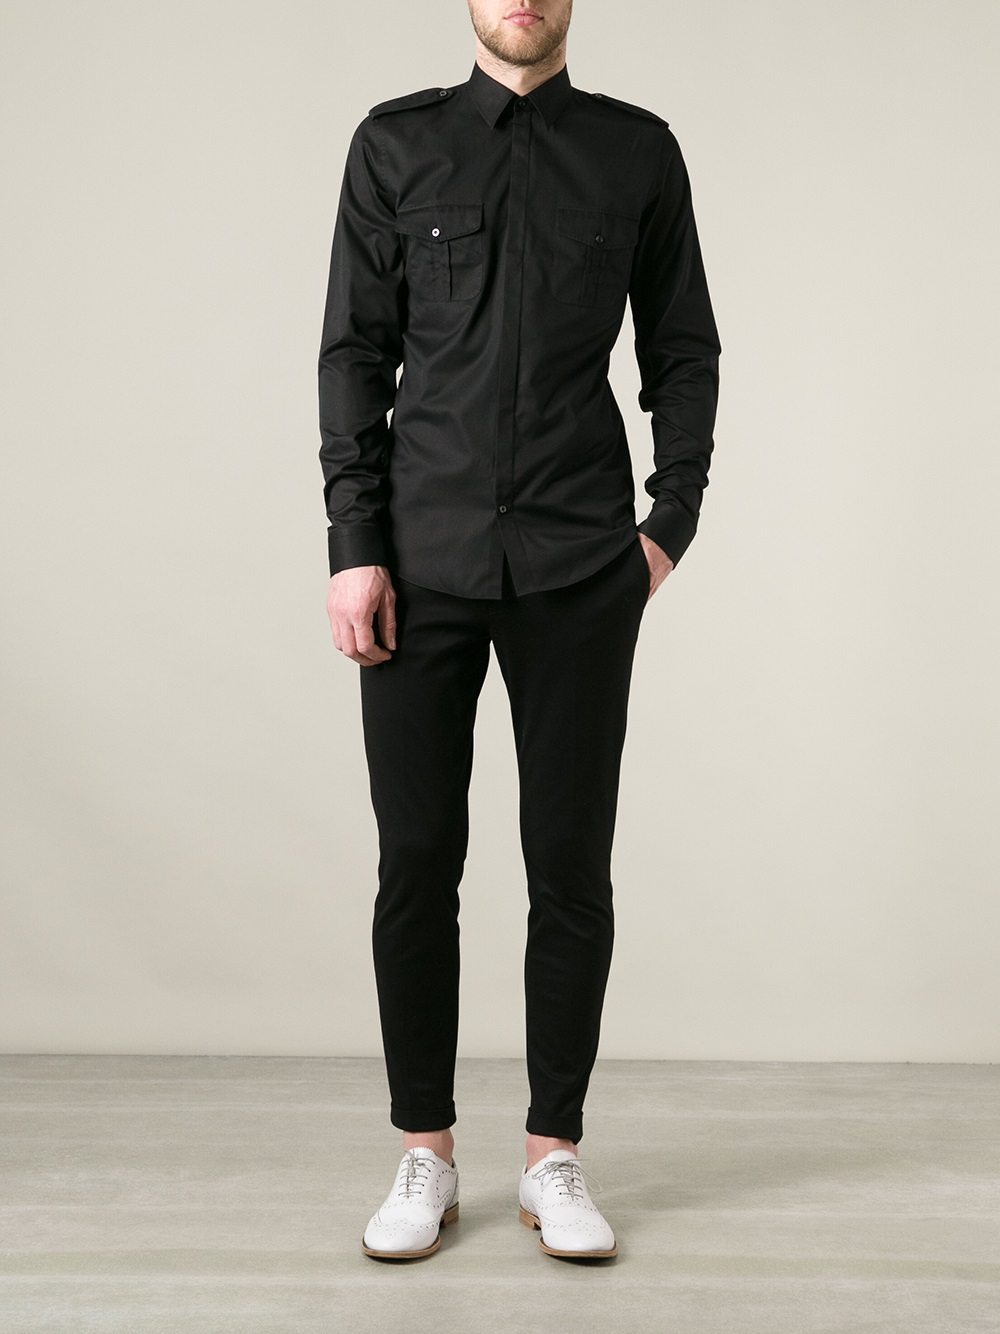 gucci-black-military-style-shirt-product-1-18397413-3-408220168-normal.jpeg